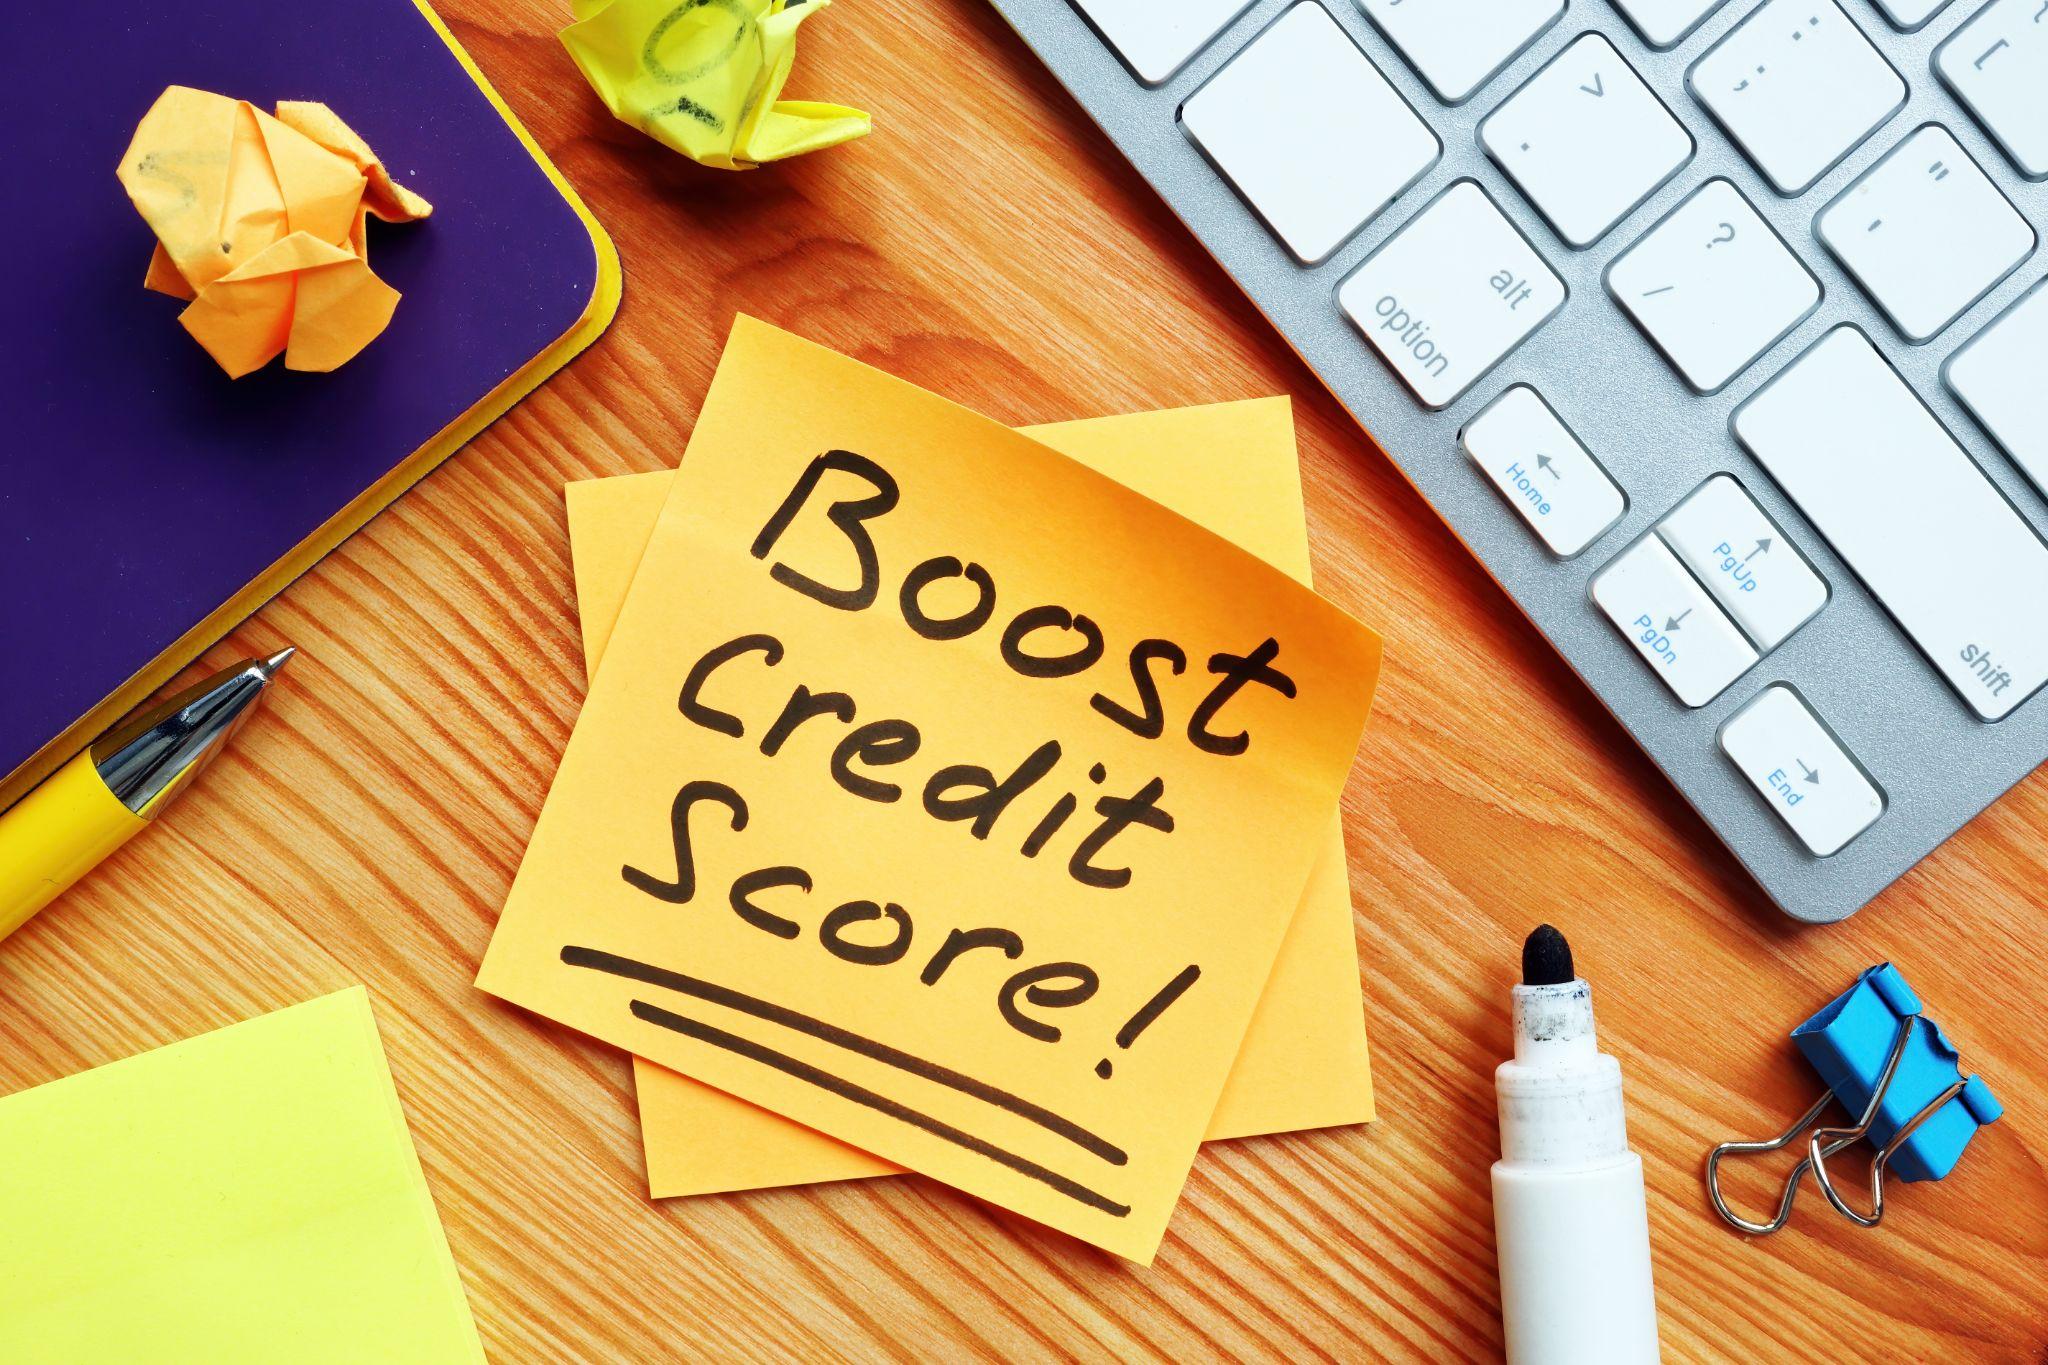 Boost credit score mark on the orange piece of paper.